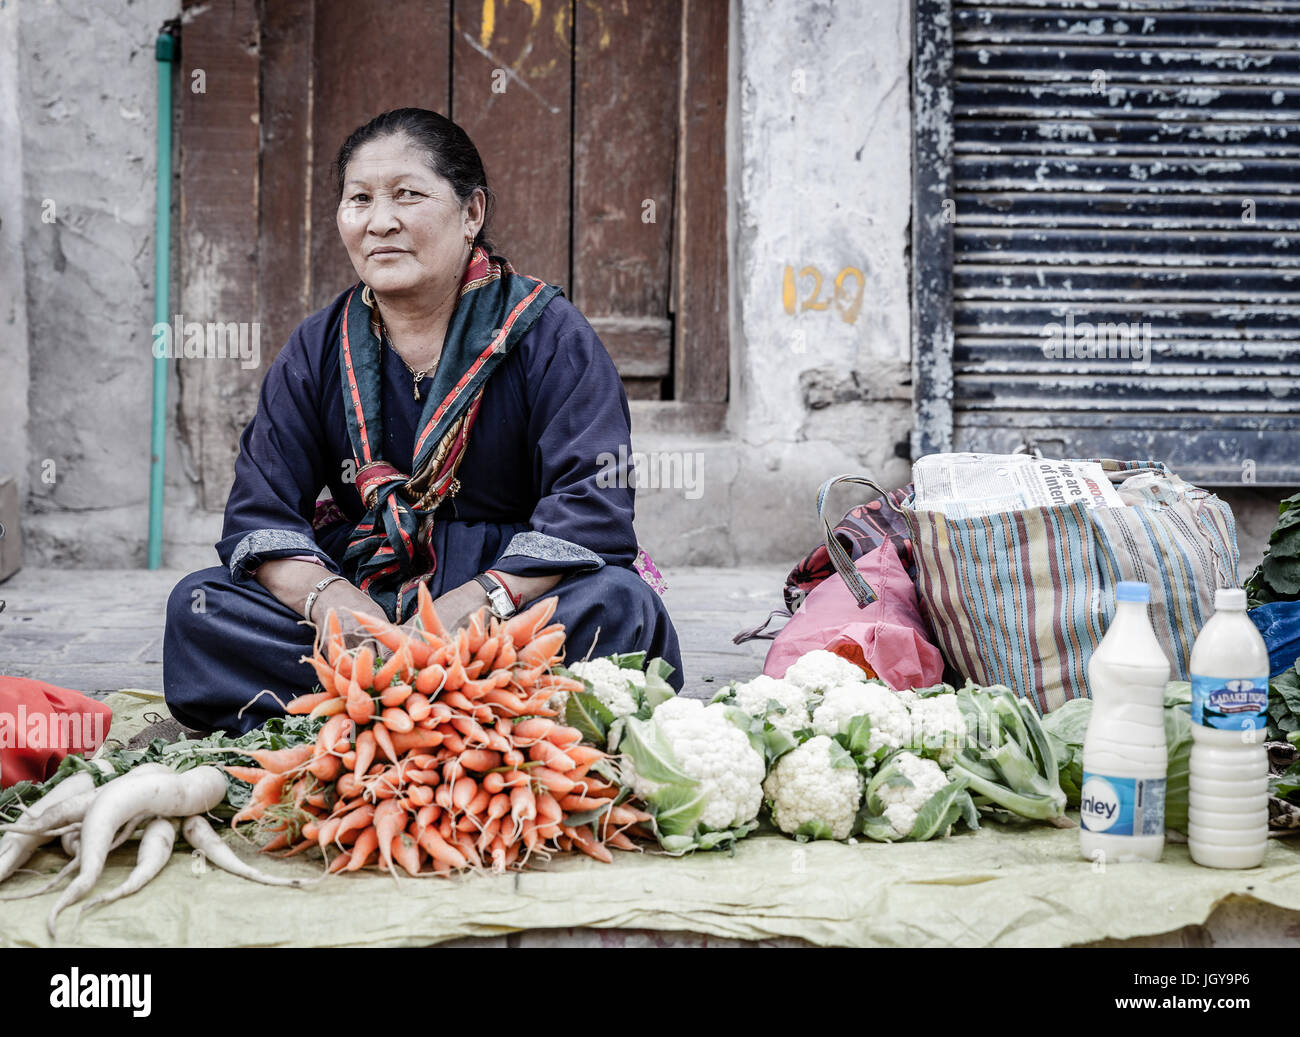 Leh, Ladakh, India, July 12, 2016: local woman is selling produce and milk on a sidewalk market in Leh, Ladakh district of Kashmir, India Stock Photo